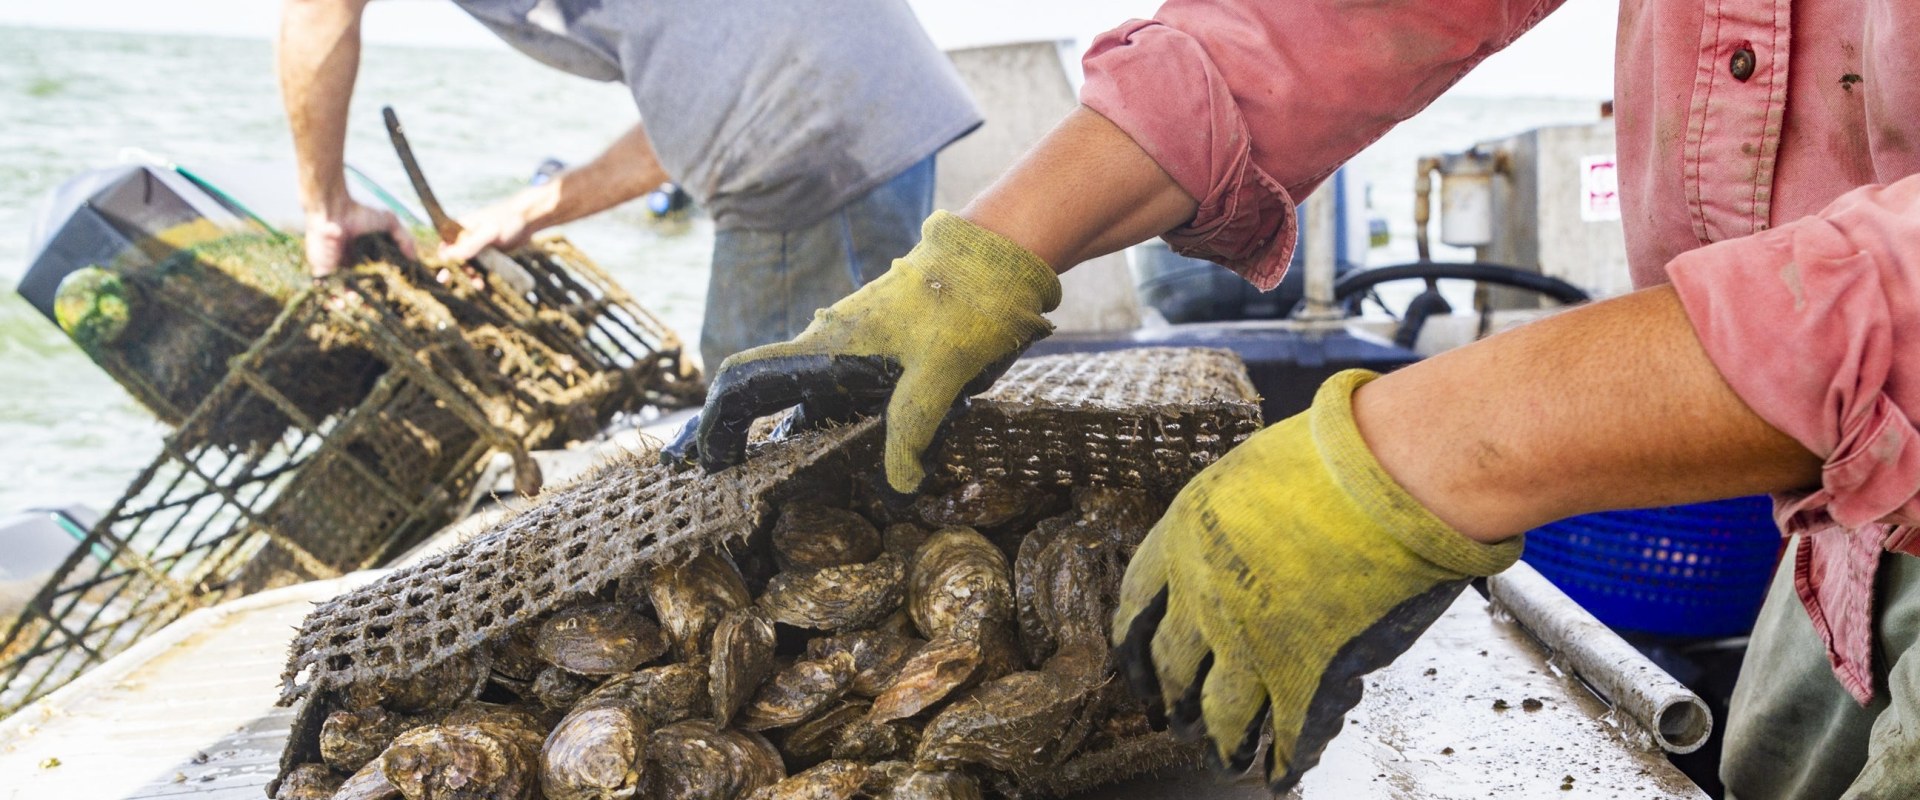 Oyster Farming and Cultivation: A Revolution in Fairhope, Alabama